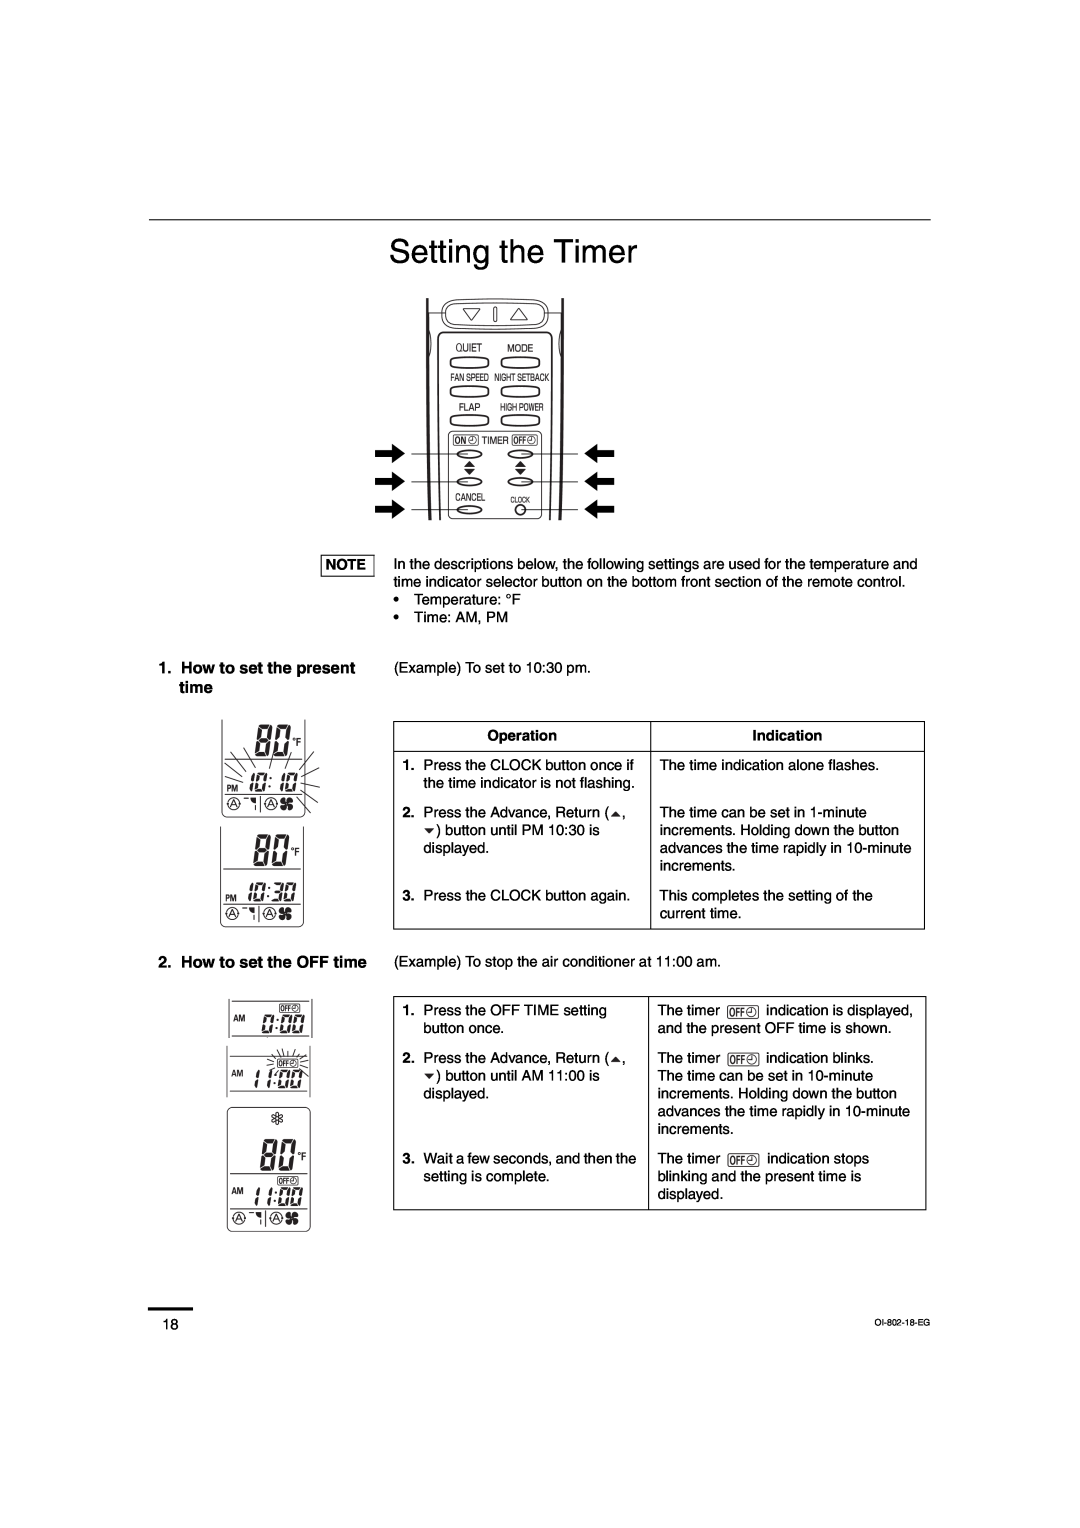 Sanyo CH0971, CH1271 service manual Setting the Timer, How to set the present time 